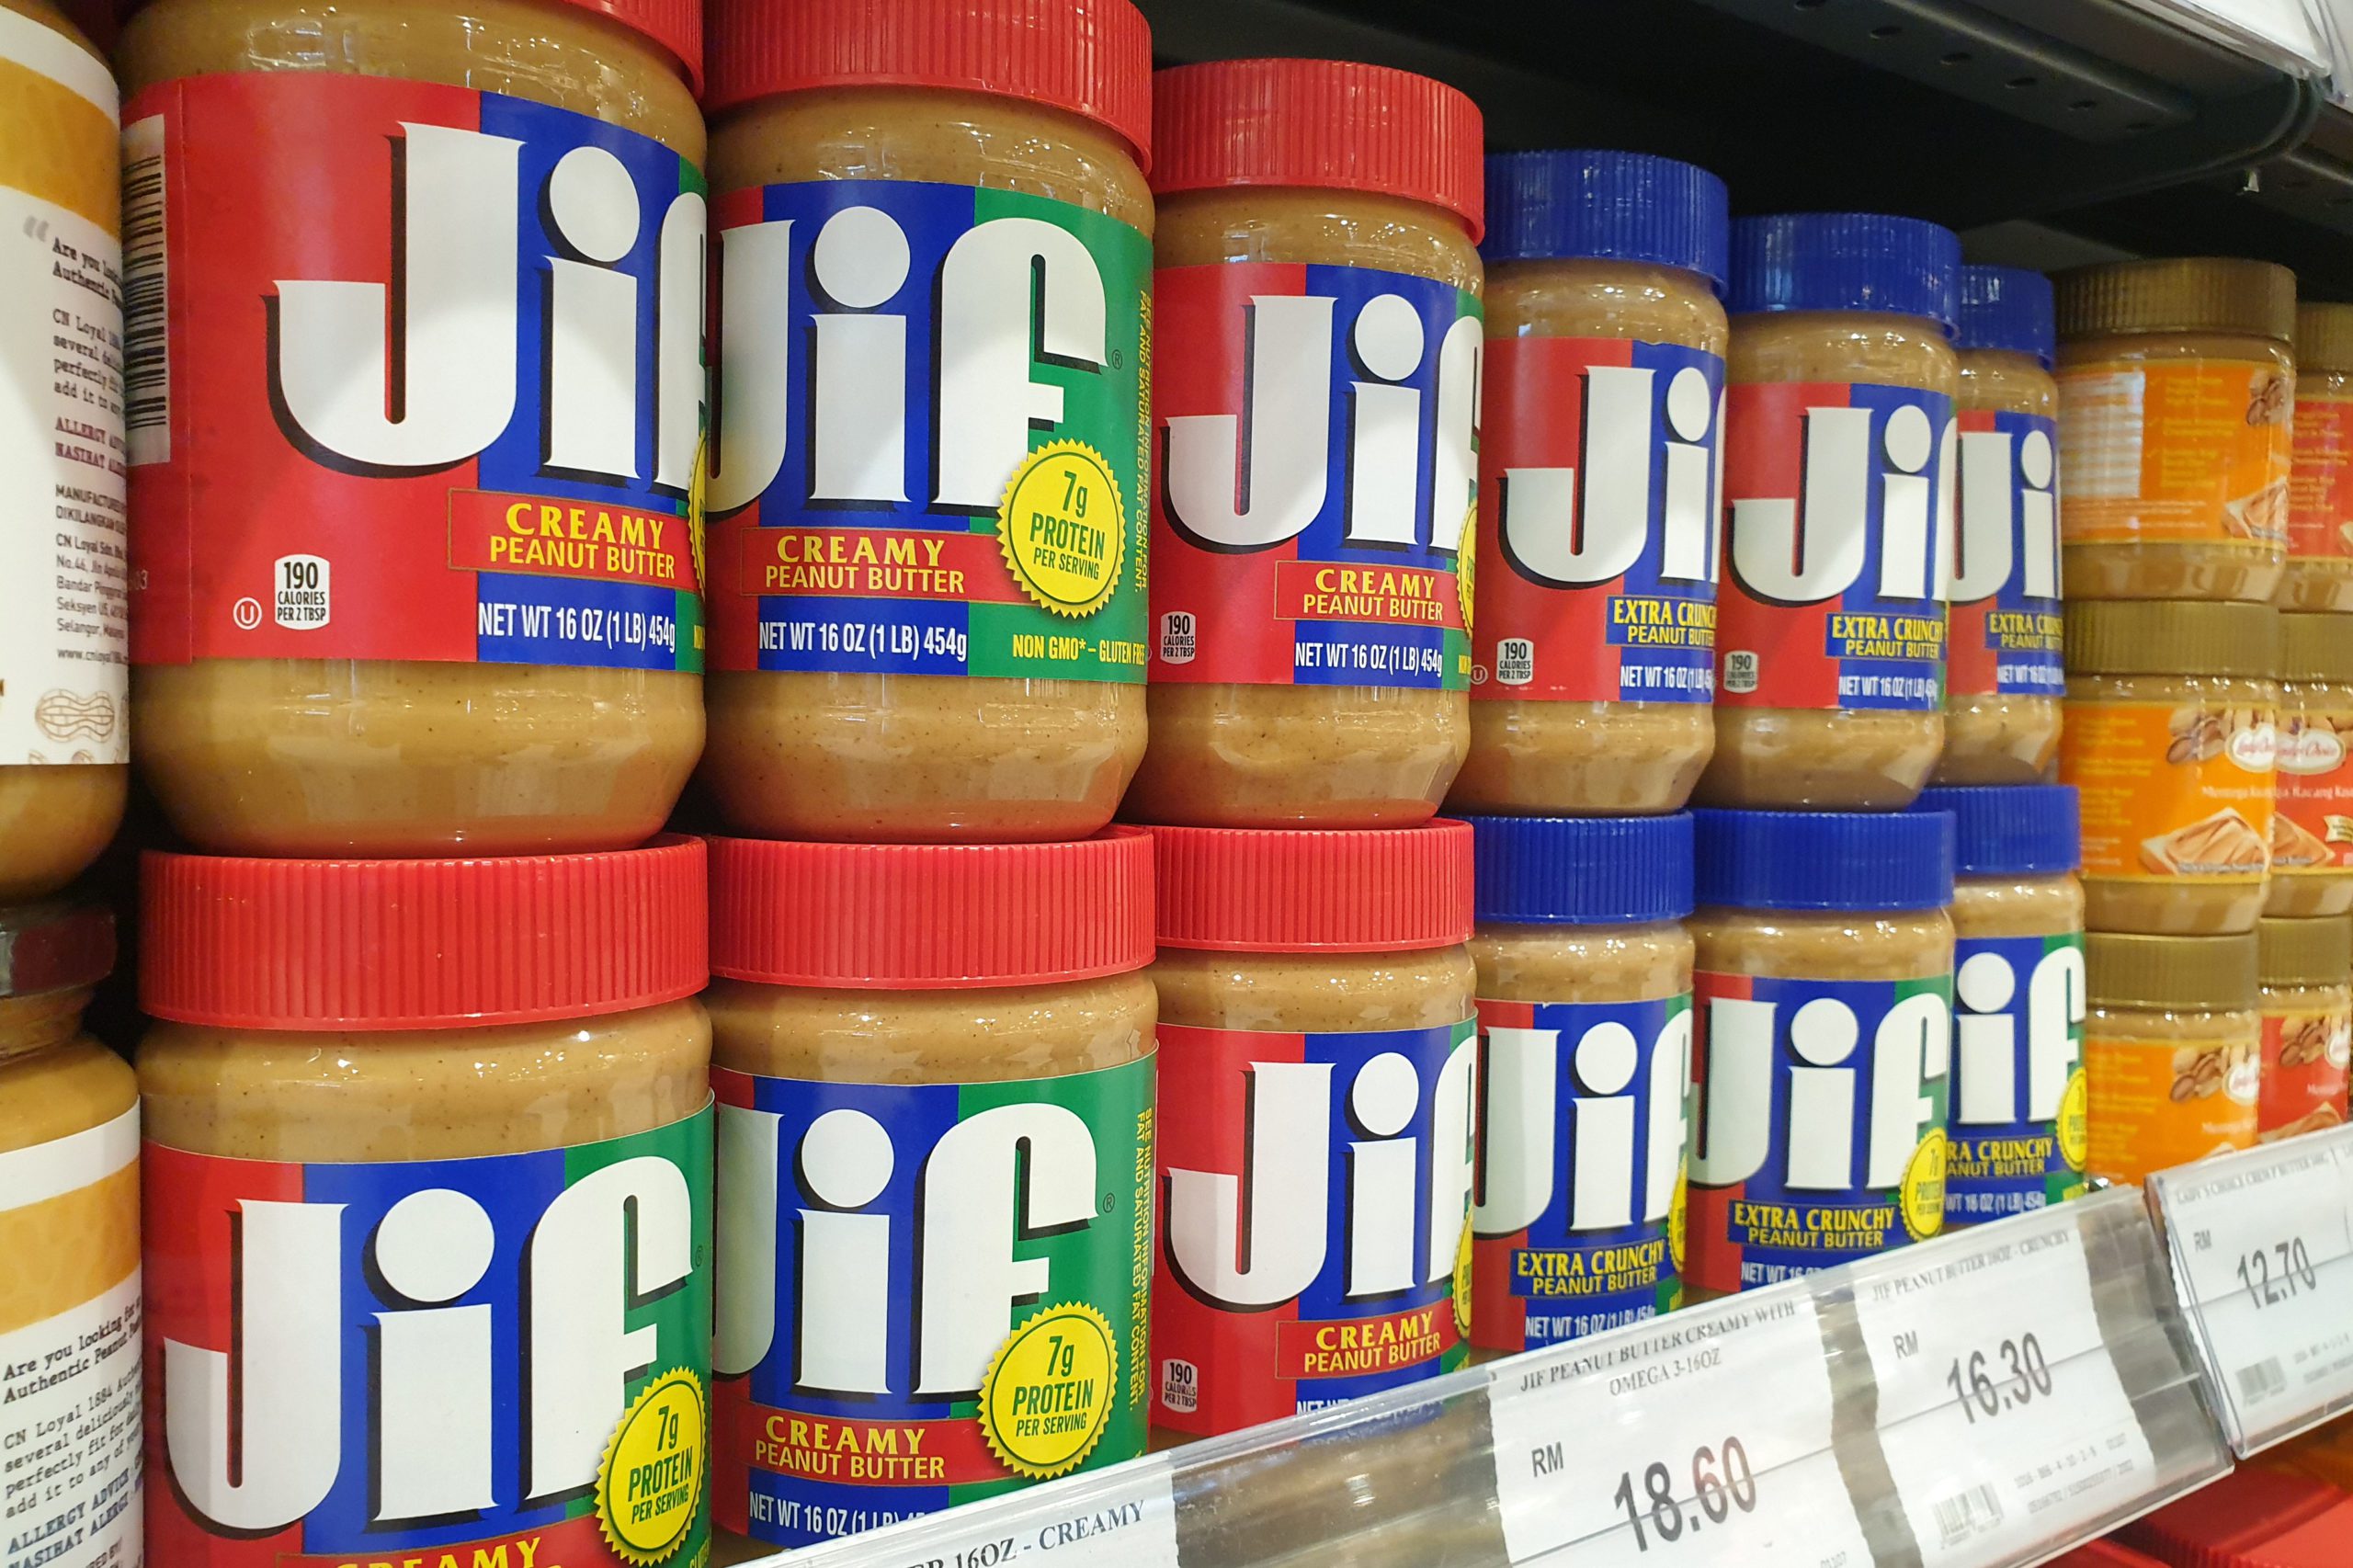 Jif Peanut Butter Linked to Salmonella Cases